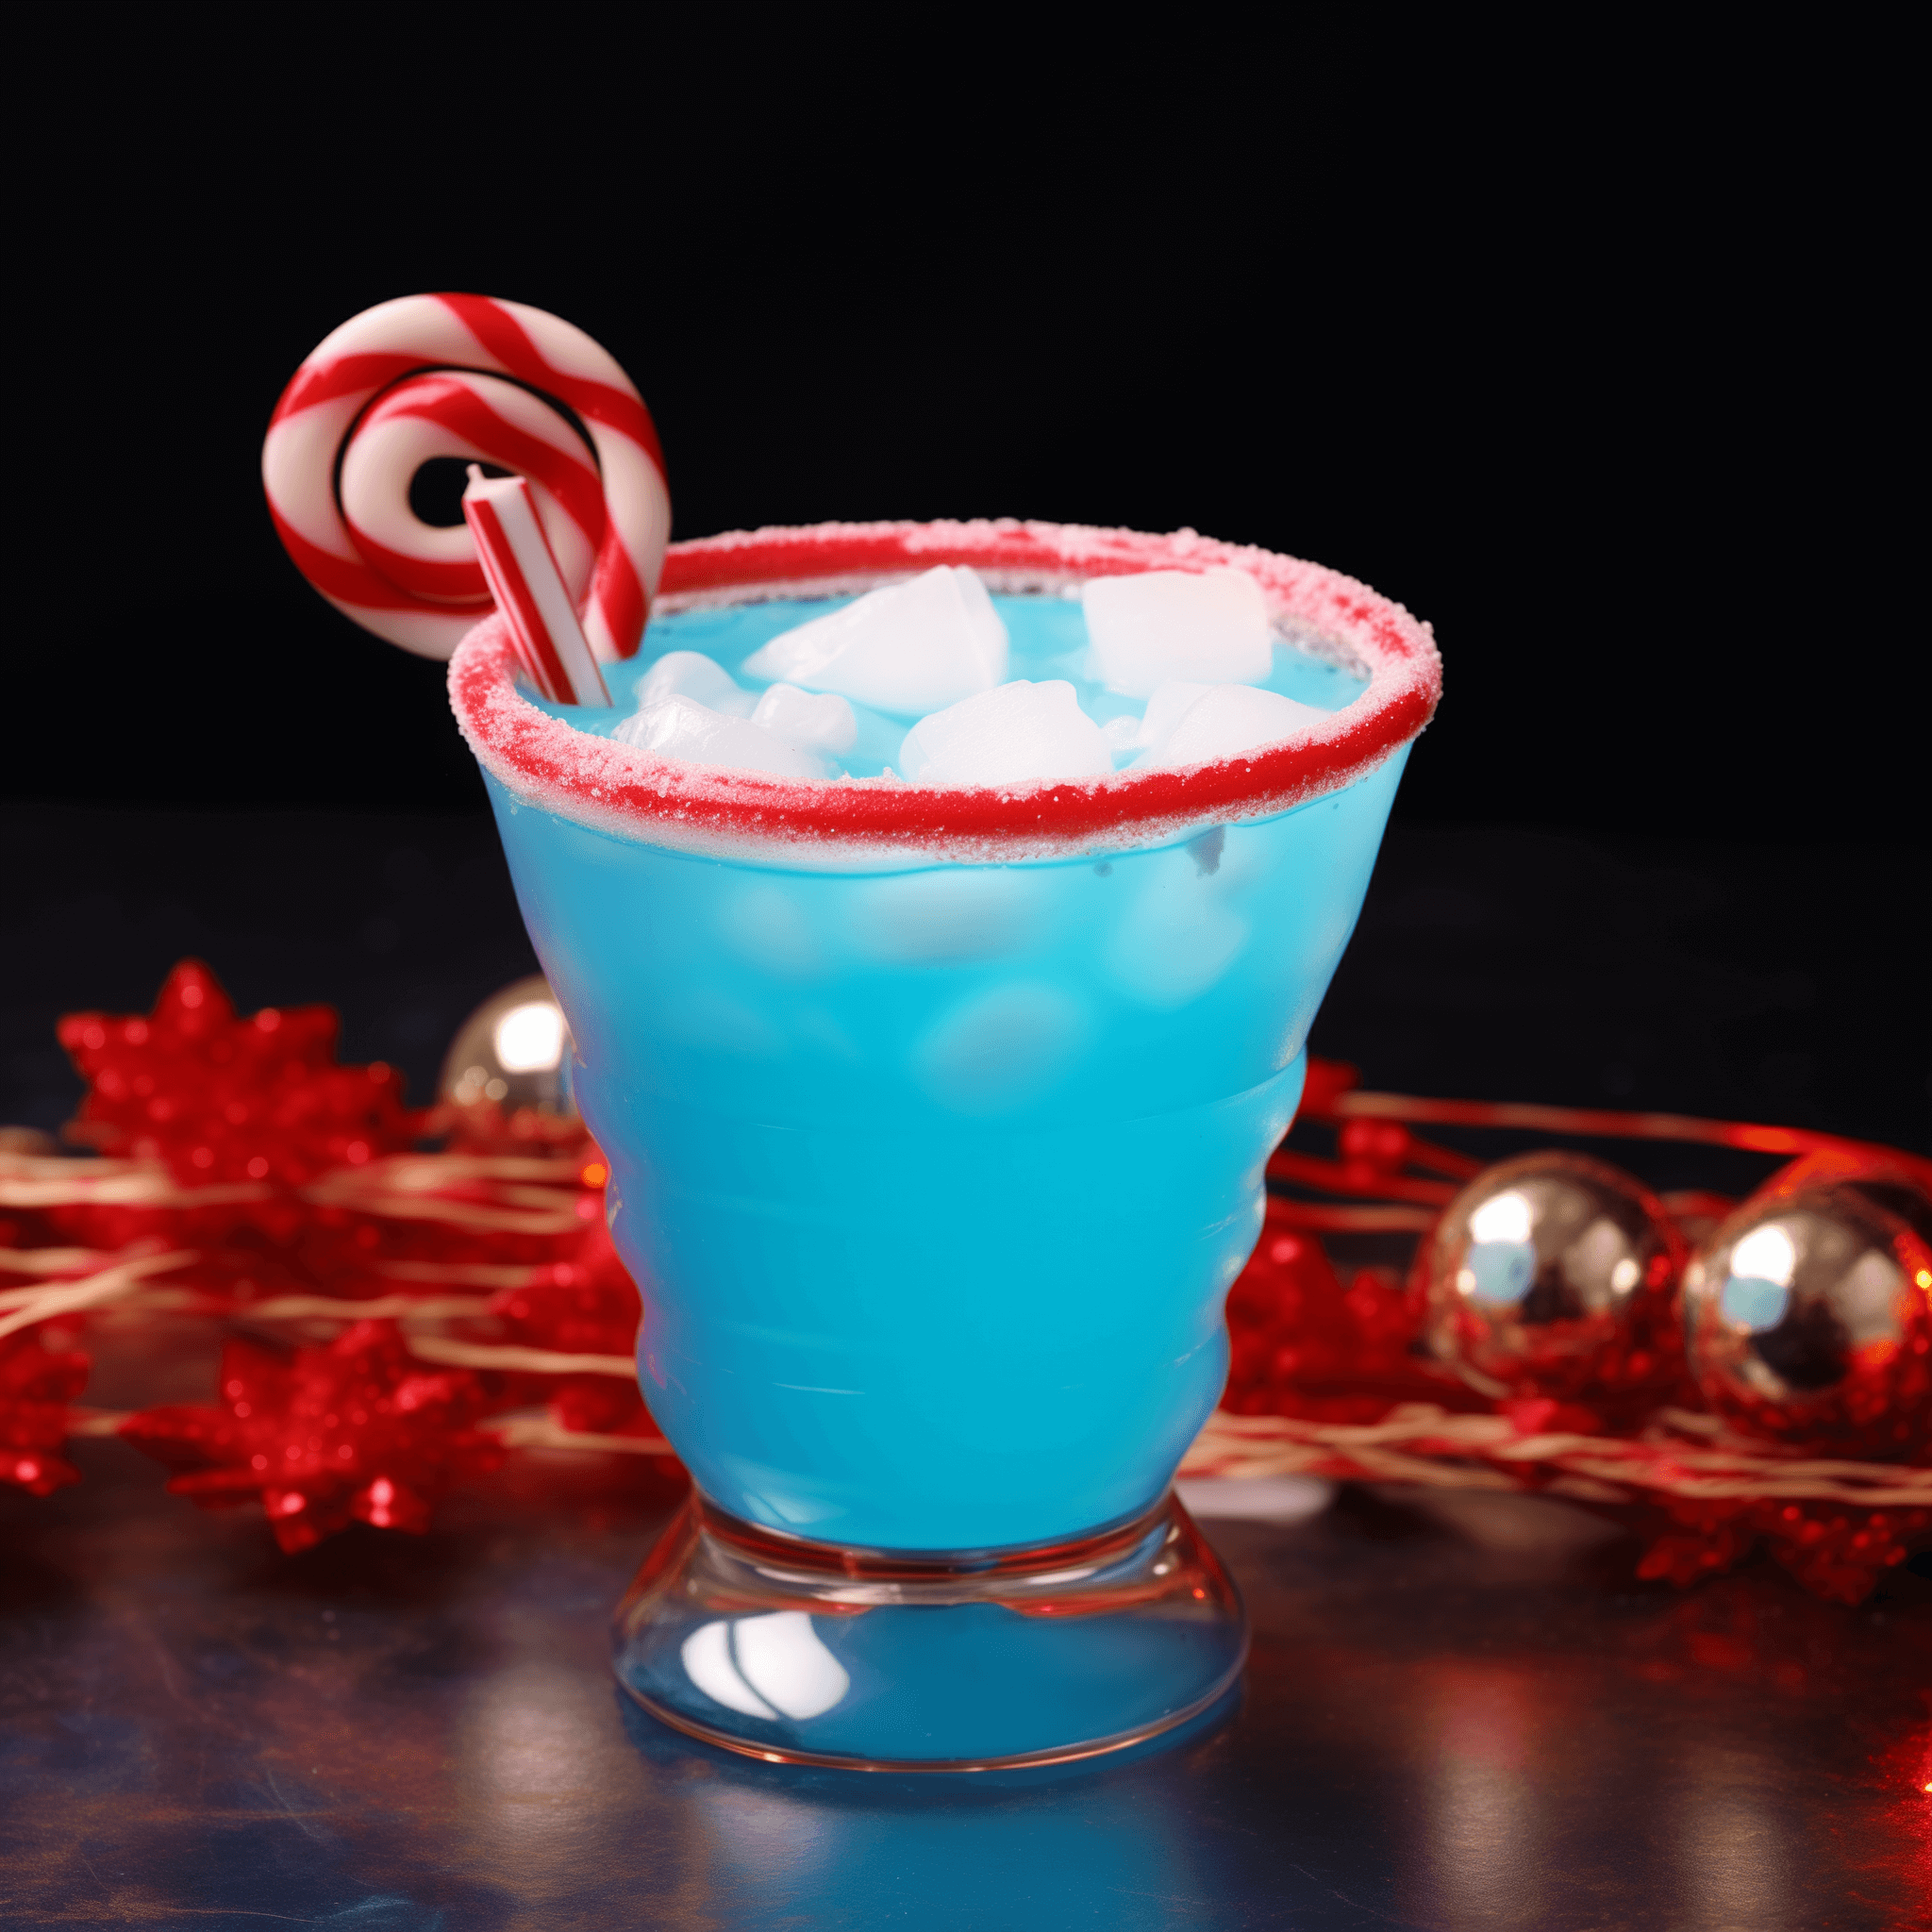 Frosty The Snowman Cocktail Recipe - The Frosty The Snowman cocktail is a delightful blend of sweet and minty flavors with a tropical twist. The coconut rum provides a creamy sweetness, while the blue curacao offers a hint of citrus tang. The peppermint schnapps adds a refreshing minty kick, and the pineapple juice brings a fruity note. The Sprite tops it off with a fizzy lift, making the drink light and effervescent.